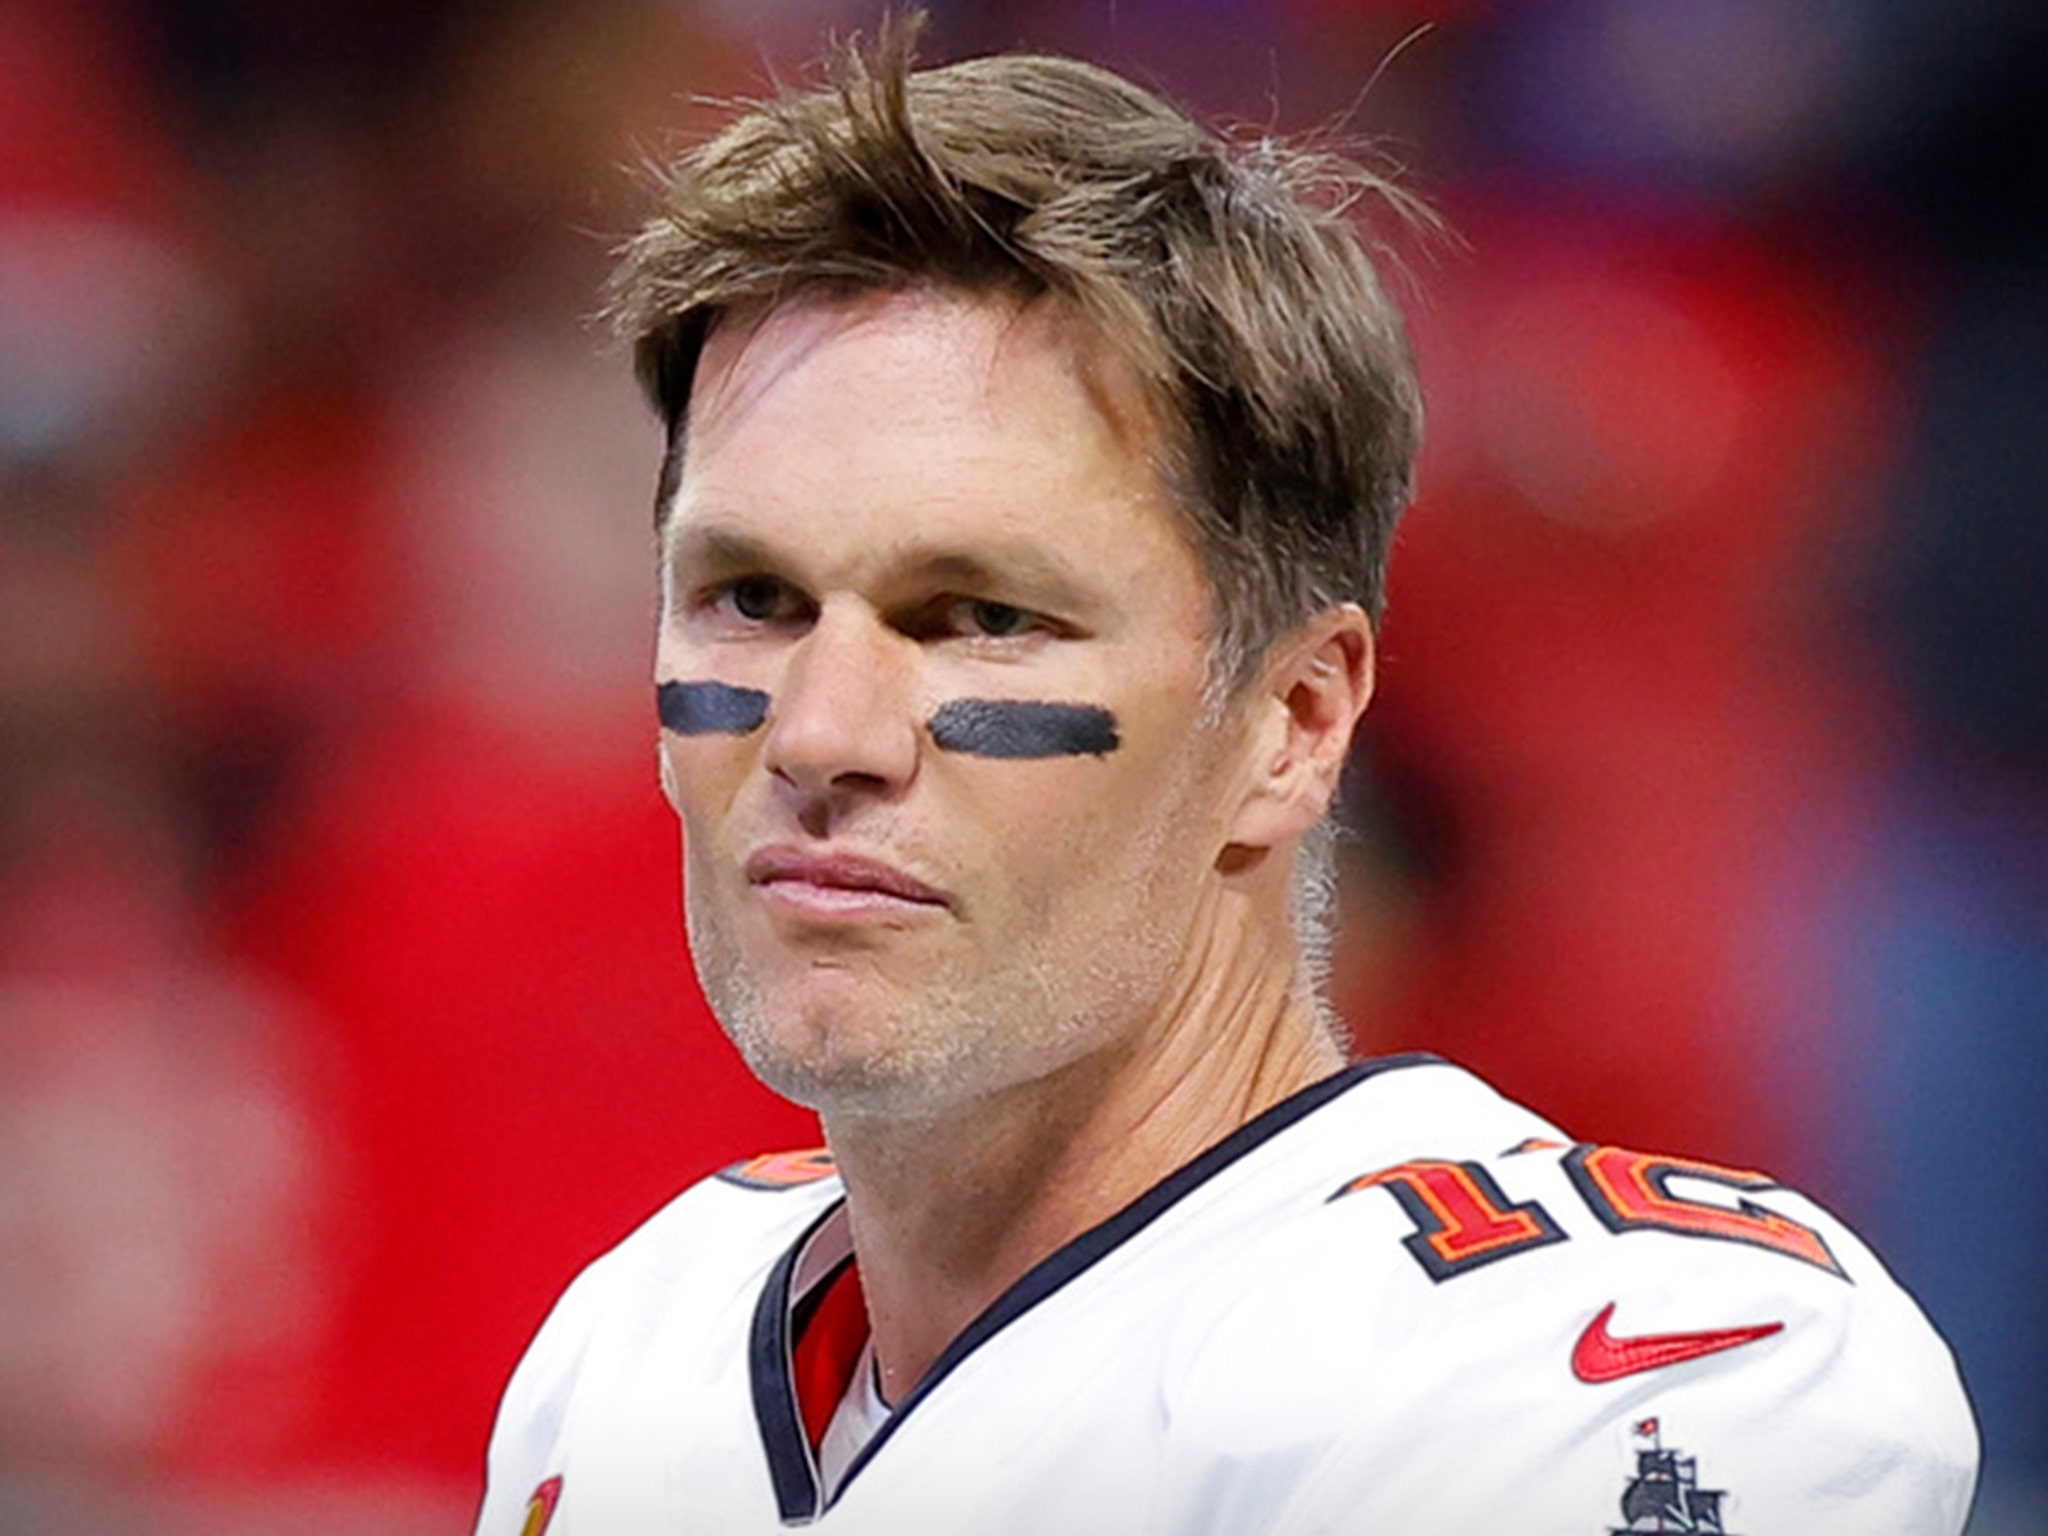 Tom Brady unretired after just 40 days: When did he retire?